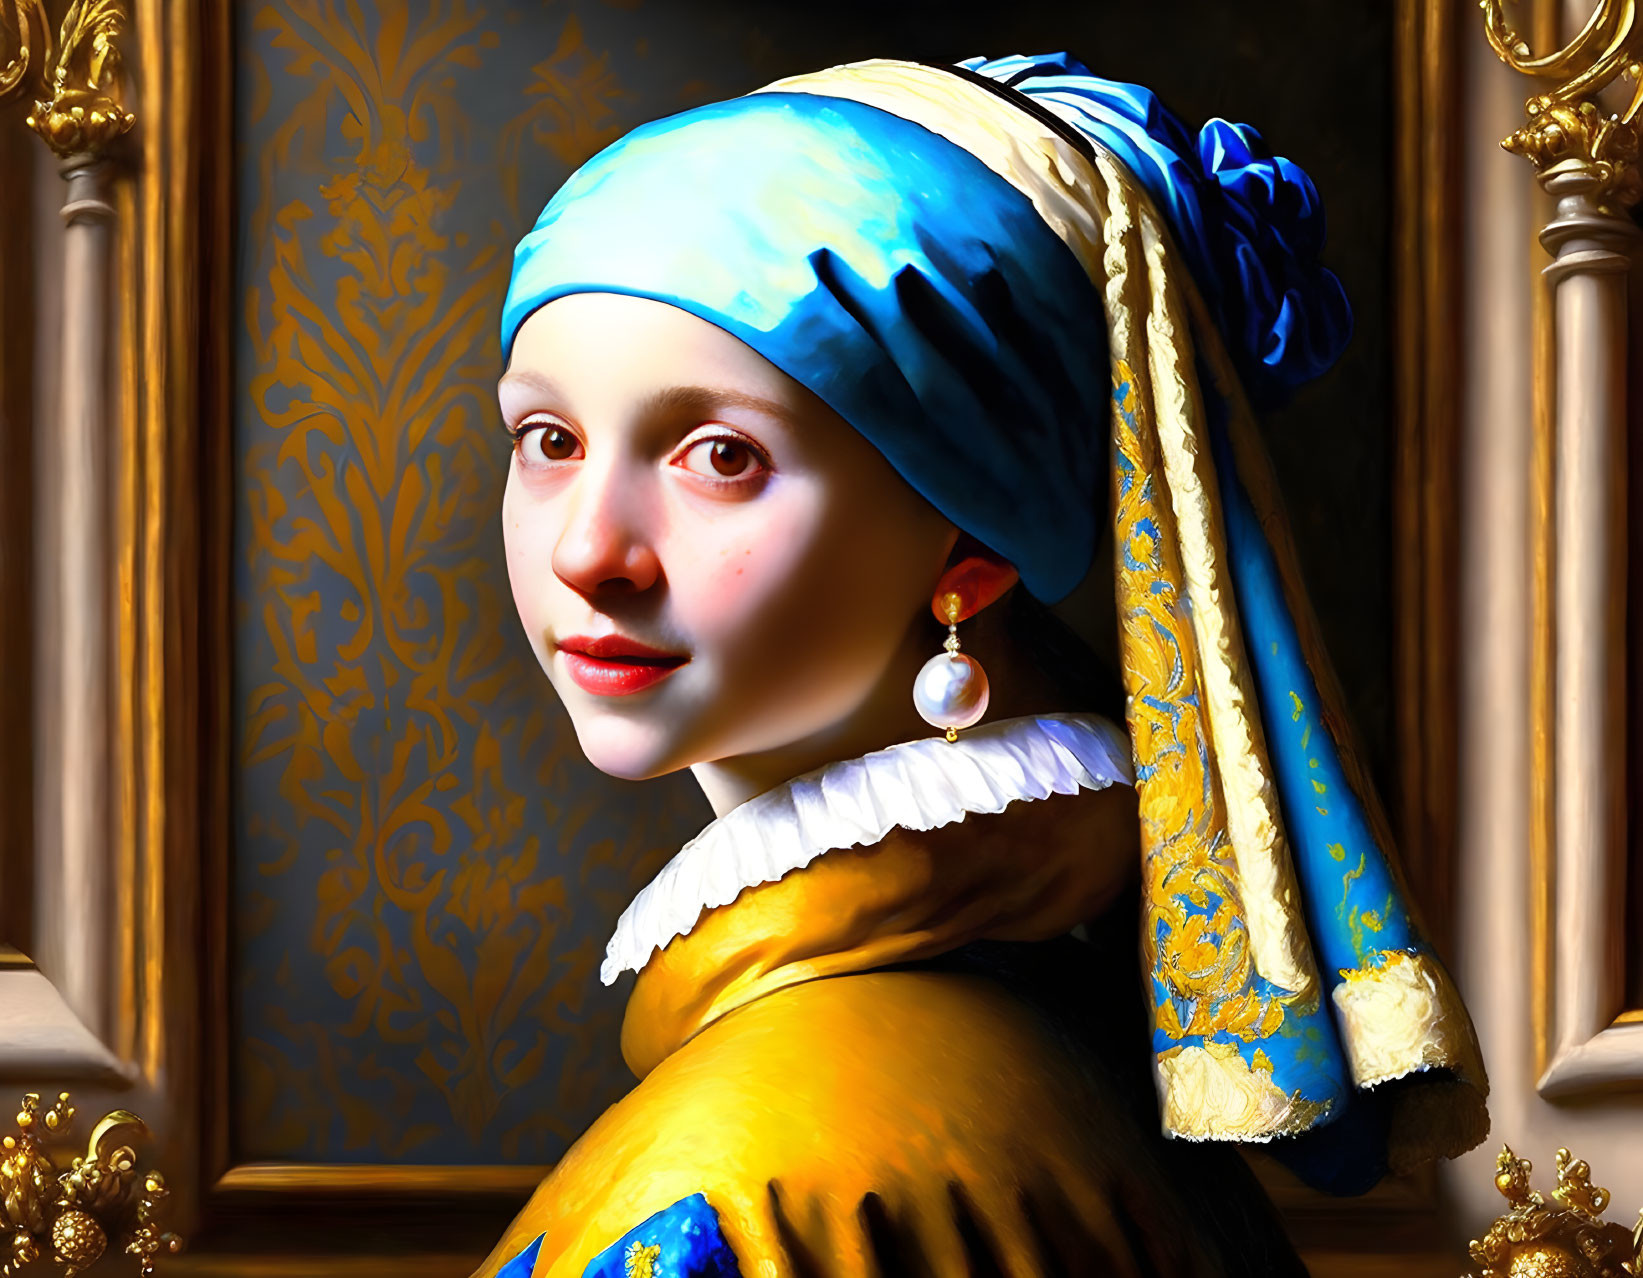 Digital art: Young woman with blue headscarf and pearl earring.